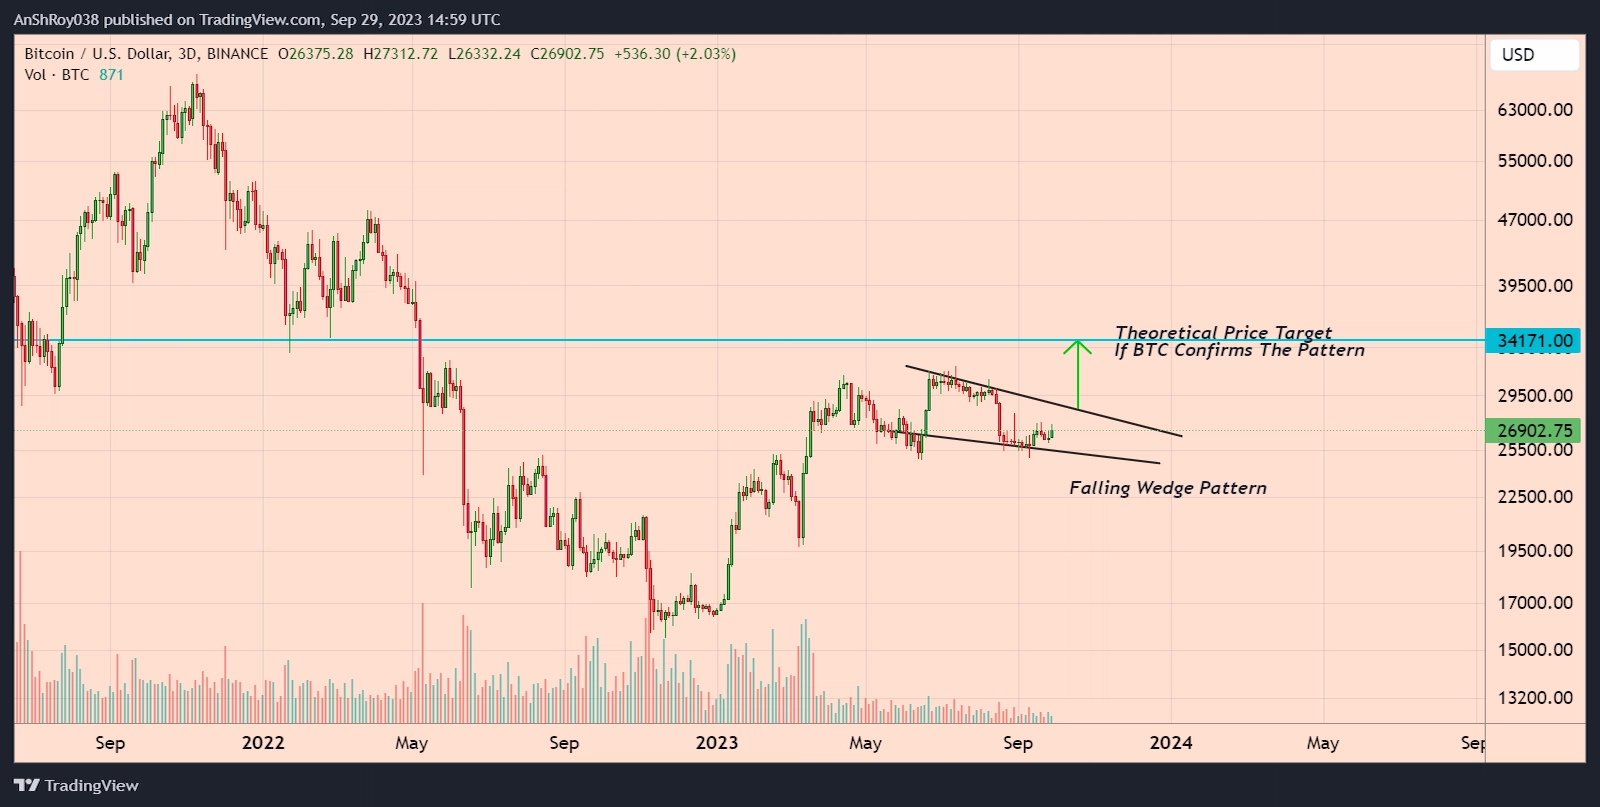 BTC price formed a bullish pattern with a 27% price target. 